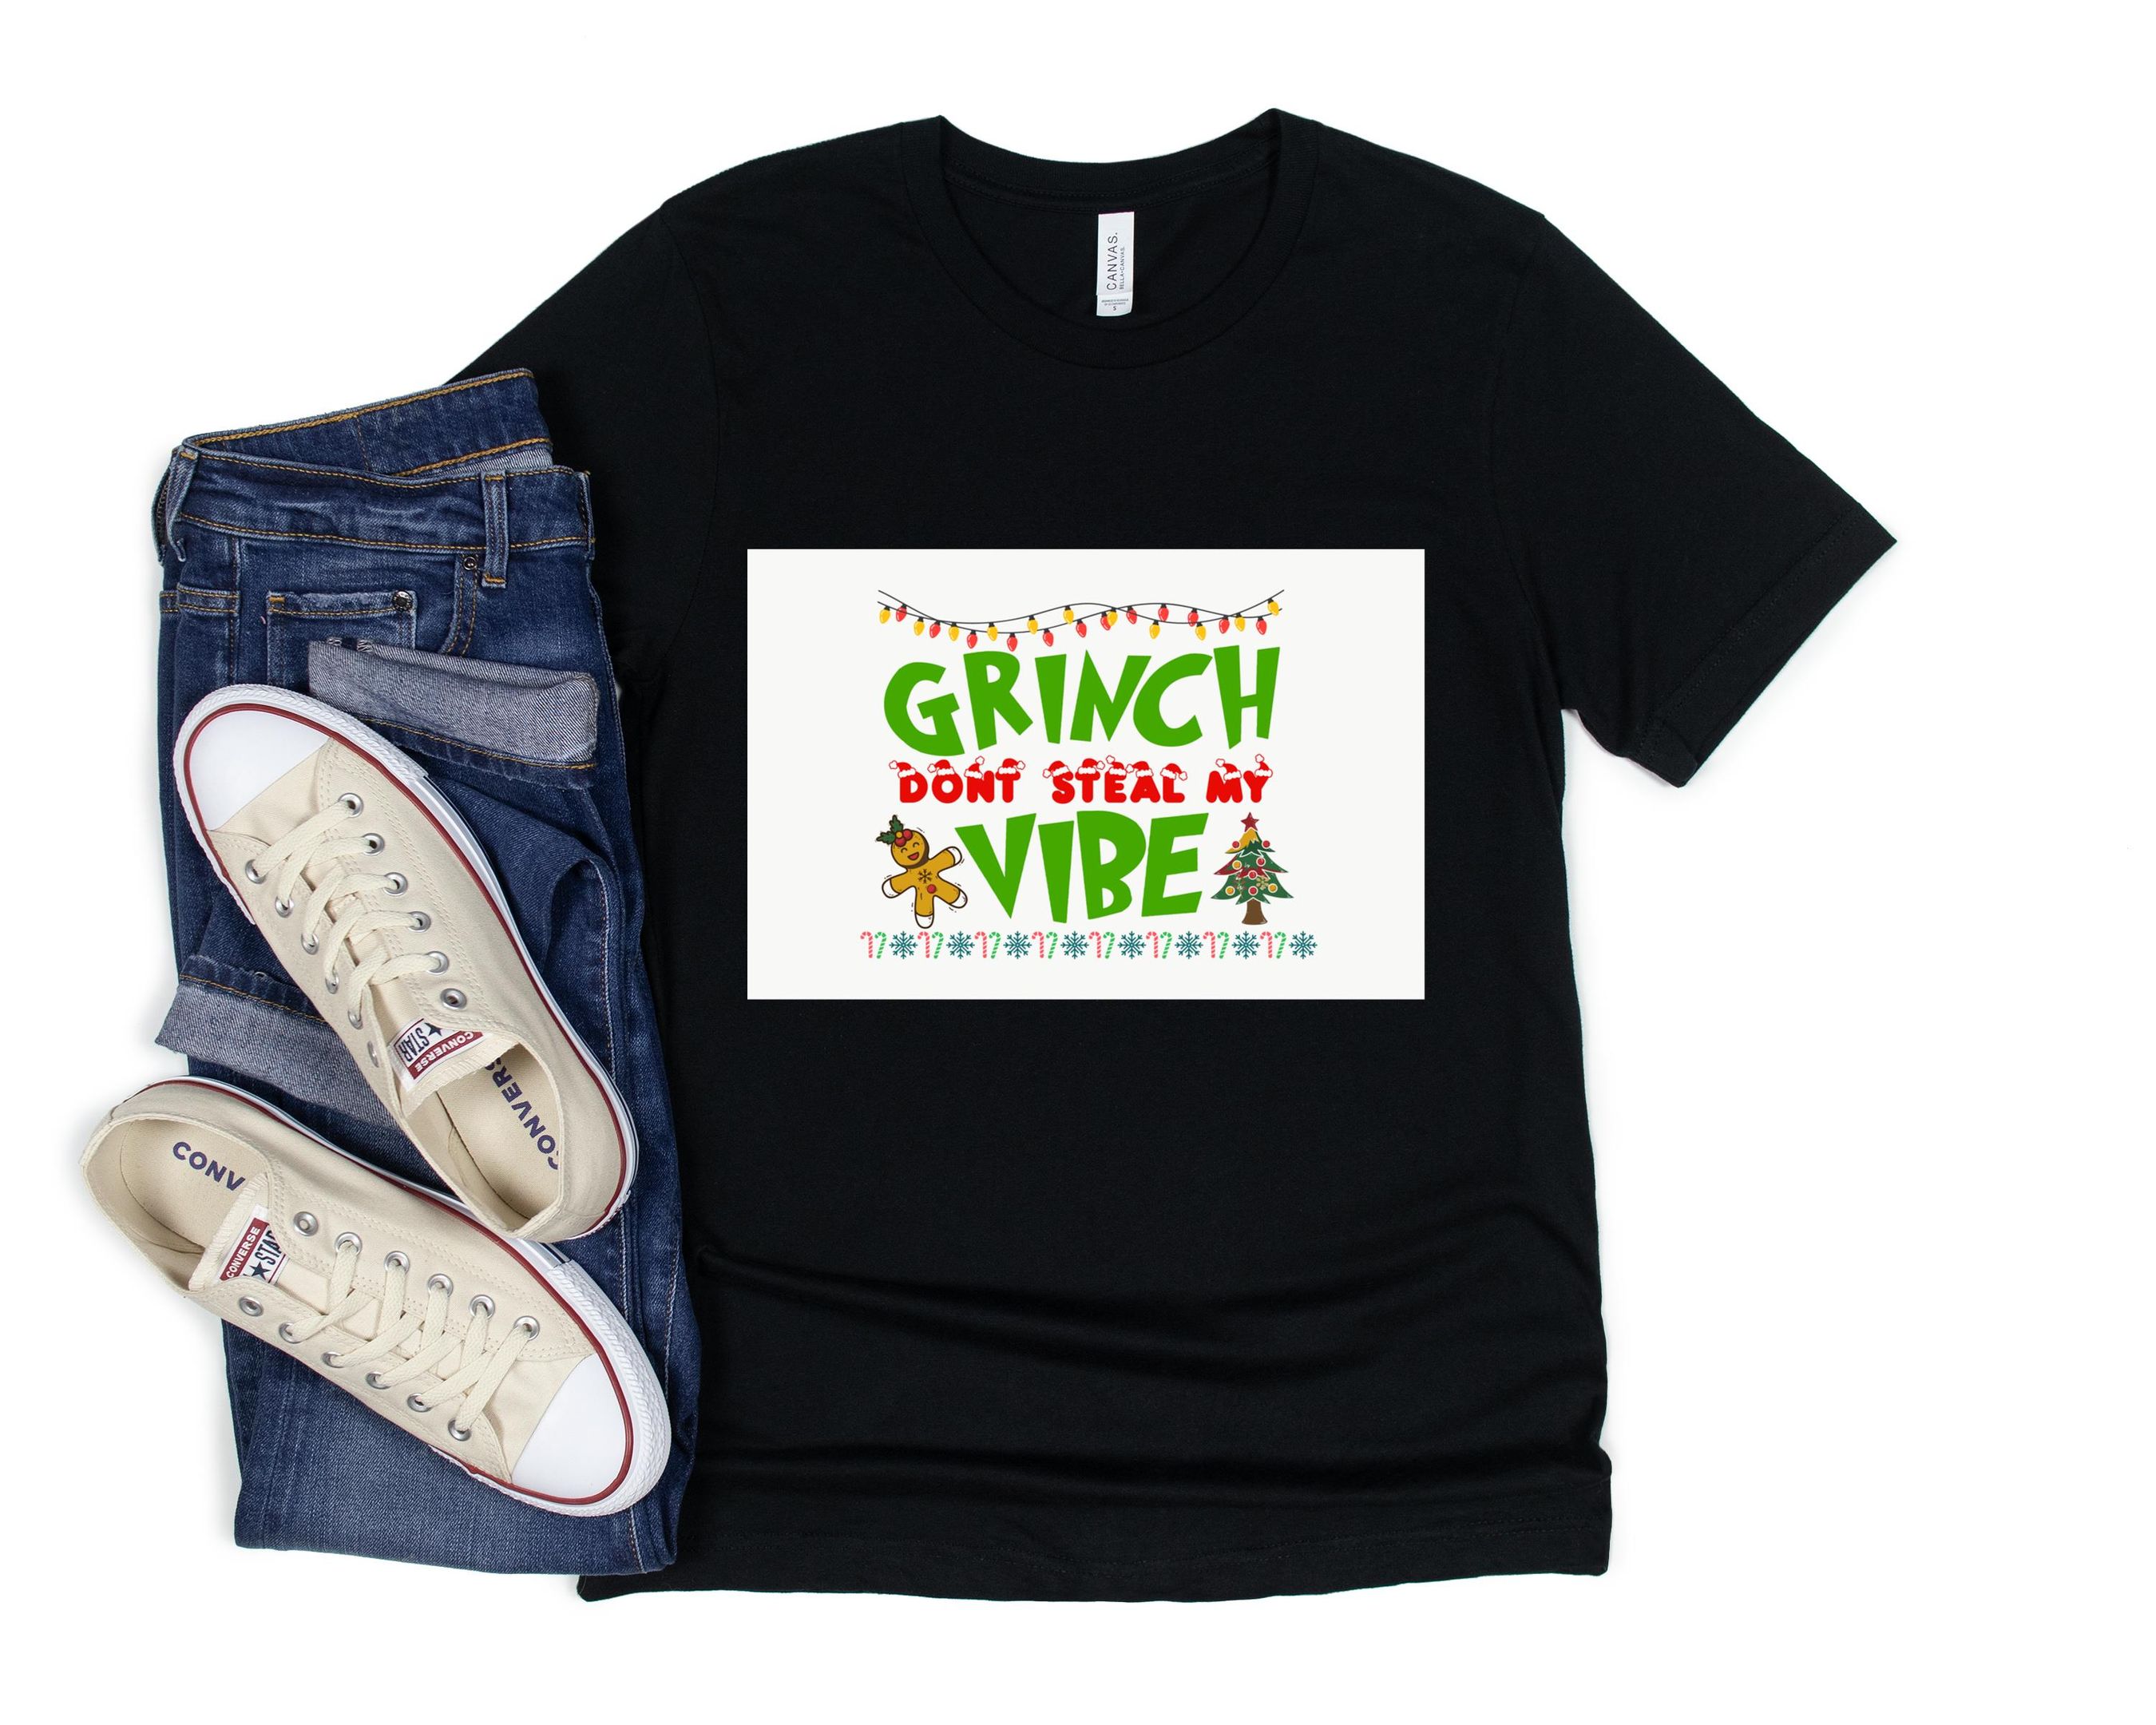 Grinch Don’T Steal My Vibe Shirt, Grinch Christmas Shirt, Merry Christmas Shirt, Christmas Lights, Christmas Funny Shirt